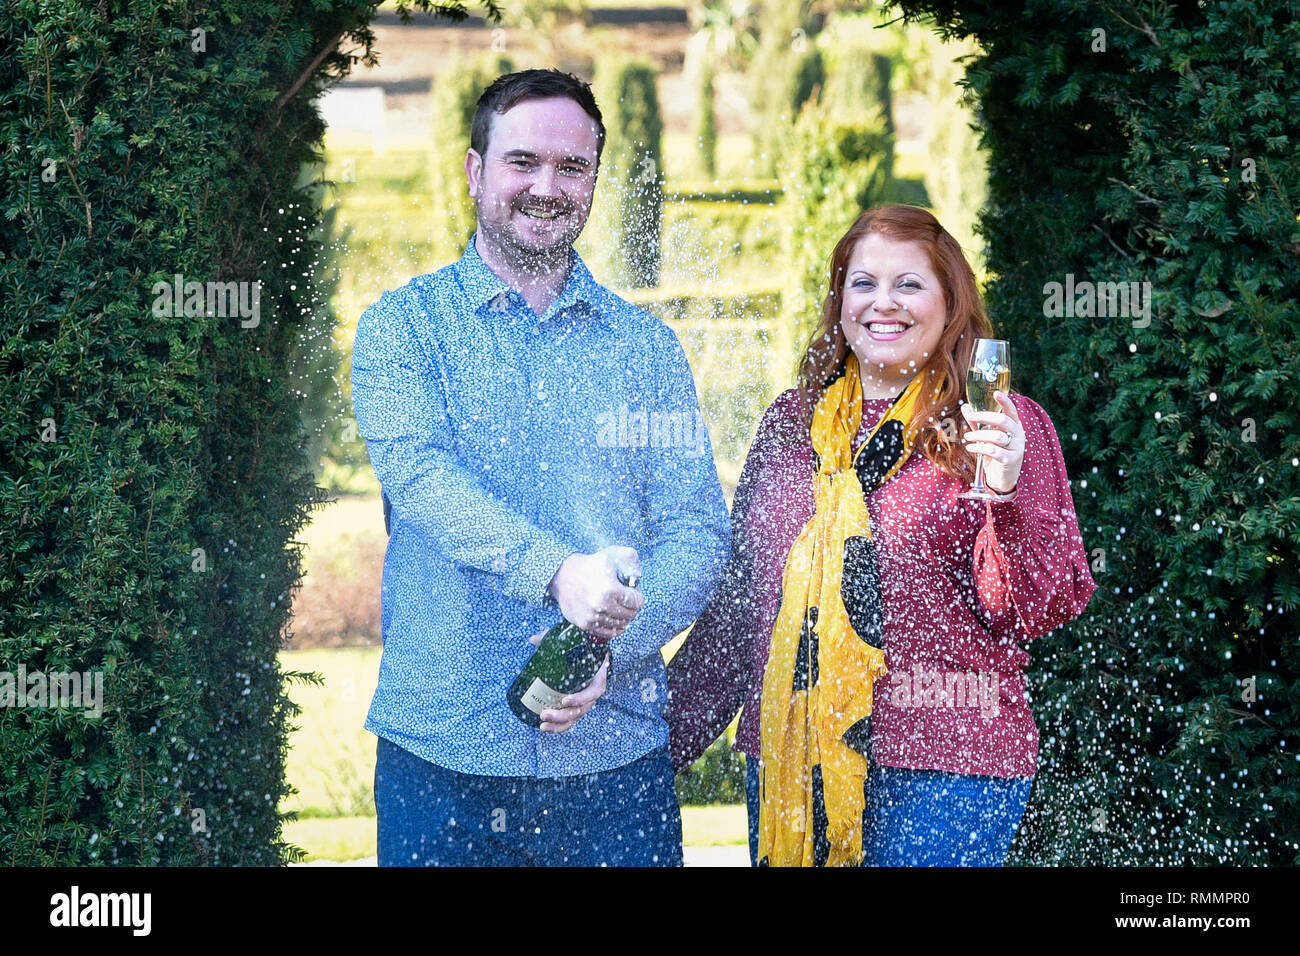 Andrew Symes and Natalie Metcalf, from Bristol, celebrate their £1 million win on the EuroMillions UK Millionaire Maker, at the De Vere Tortworth Court Hotel in Wotton-under-Edge, Gloucestershire. Stock Photo